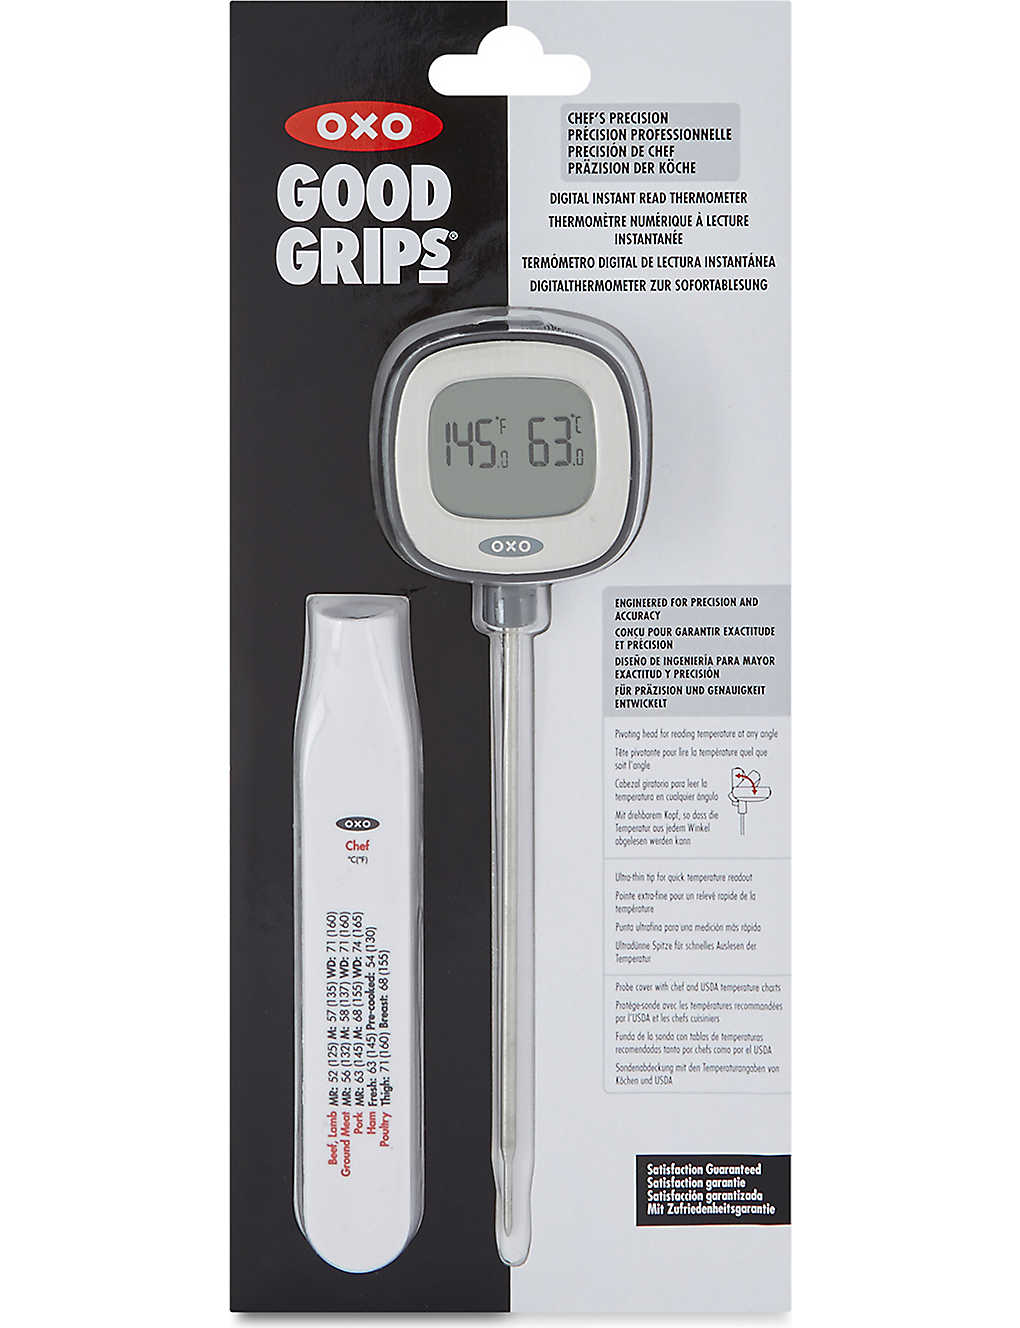 Oxo Good Grips Digital Instant Read Thermometer